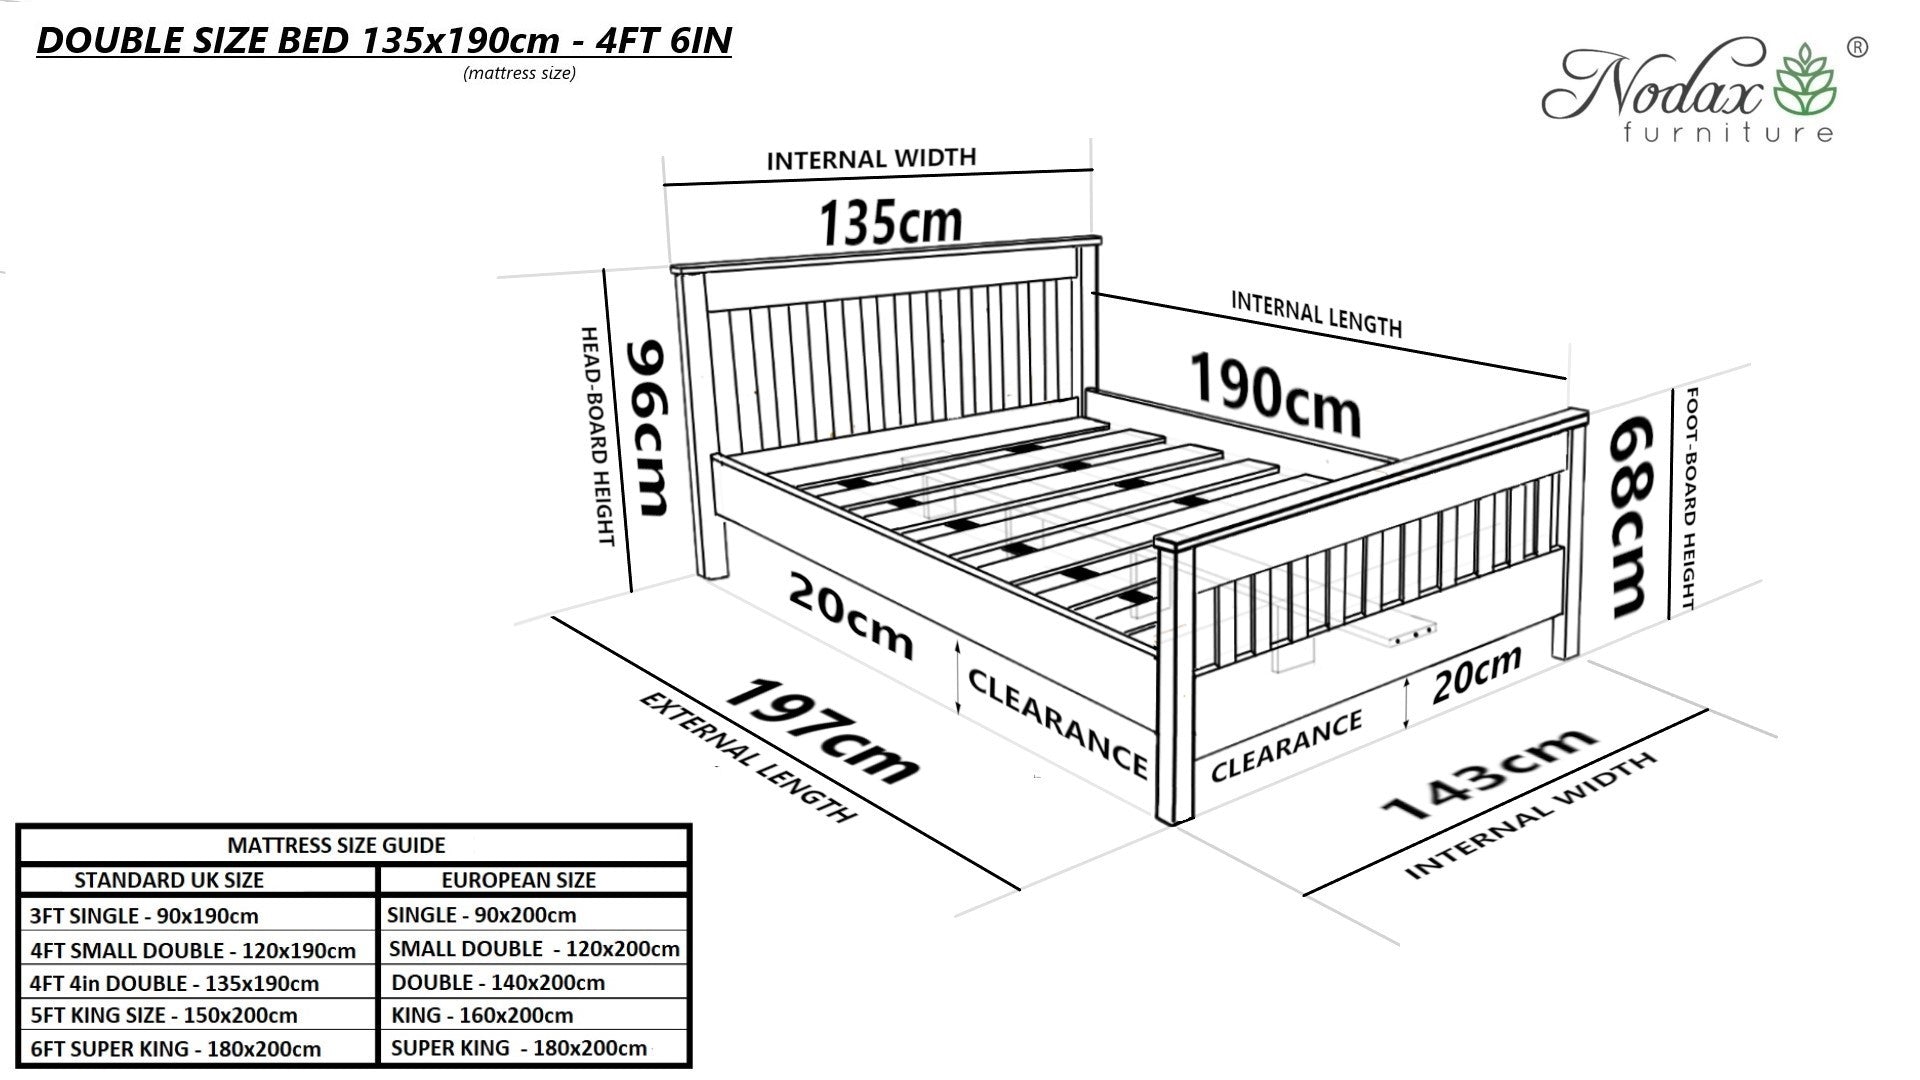 Wooden-bed-frame-dimensions-double-size